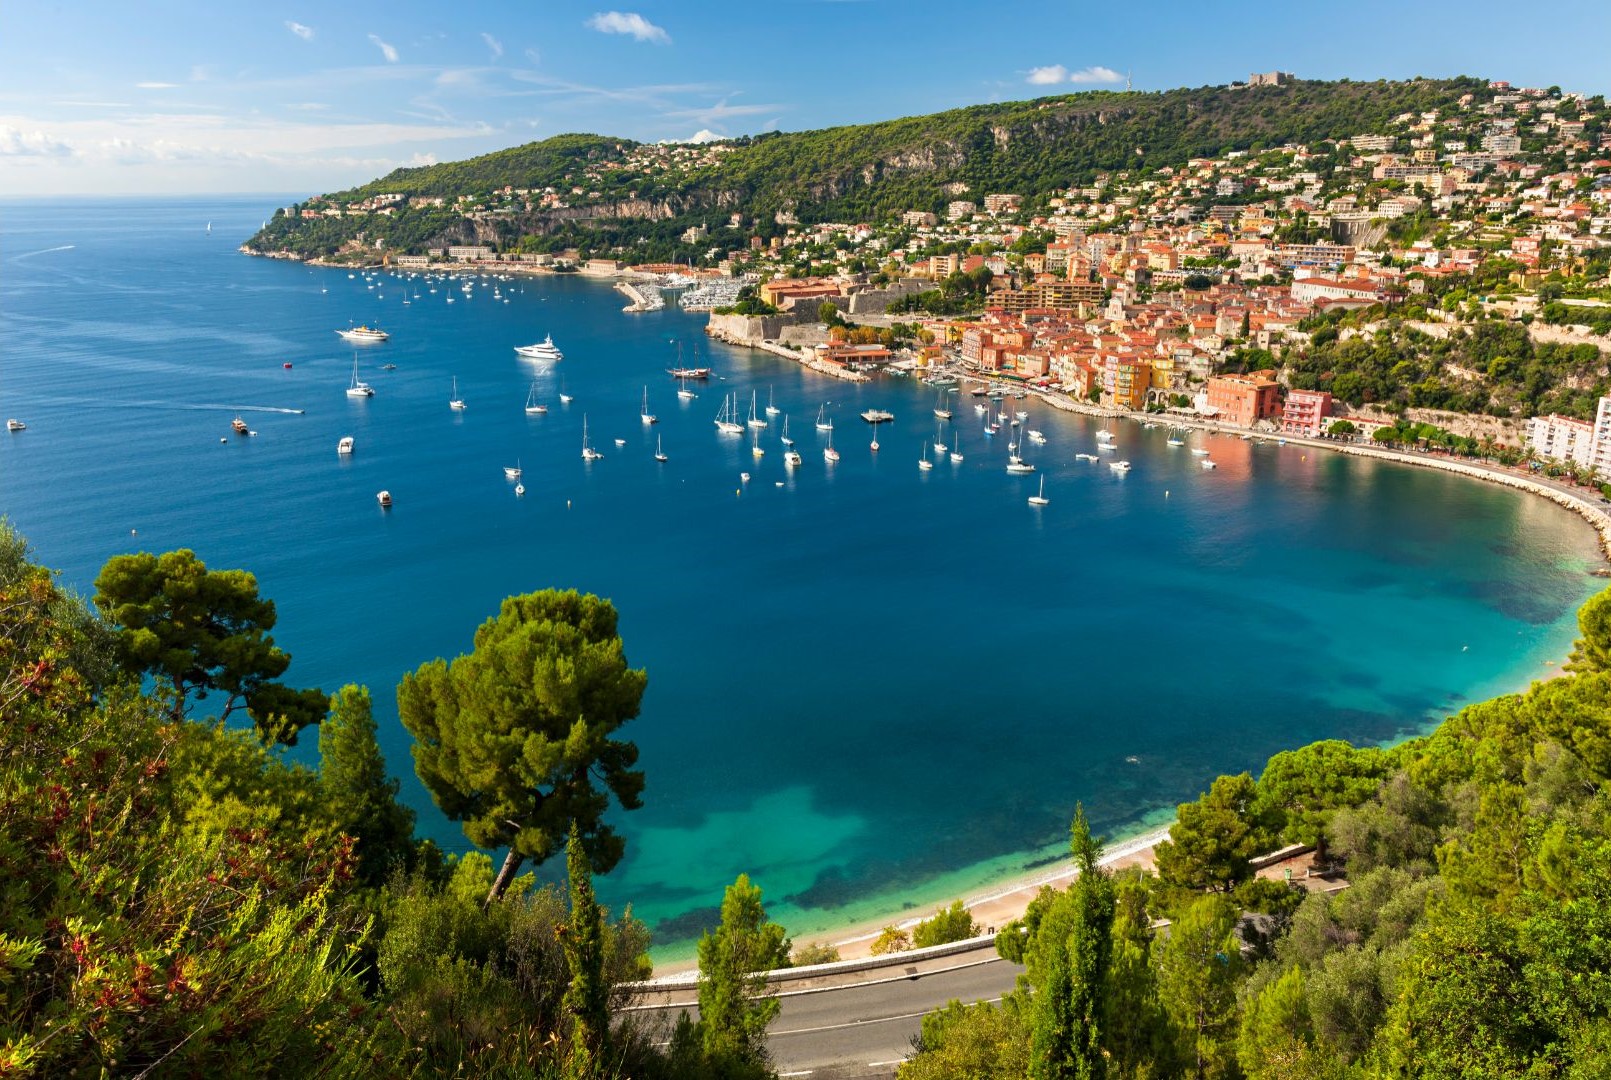 The French Riviera is famed for its Mediterranean coastline and chic resorts.